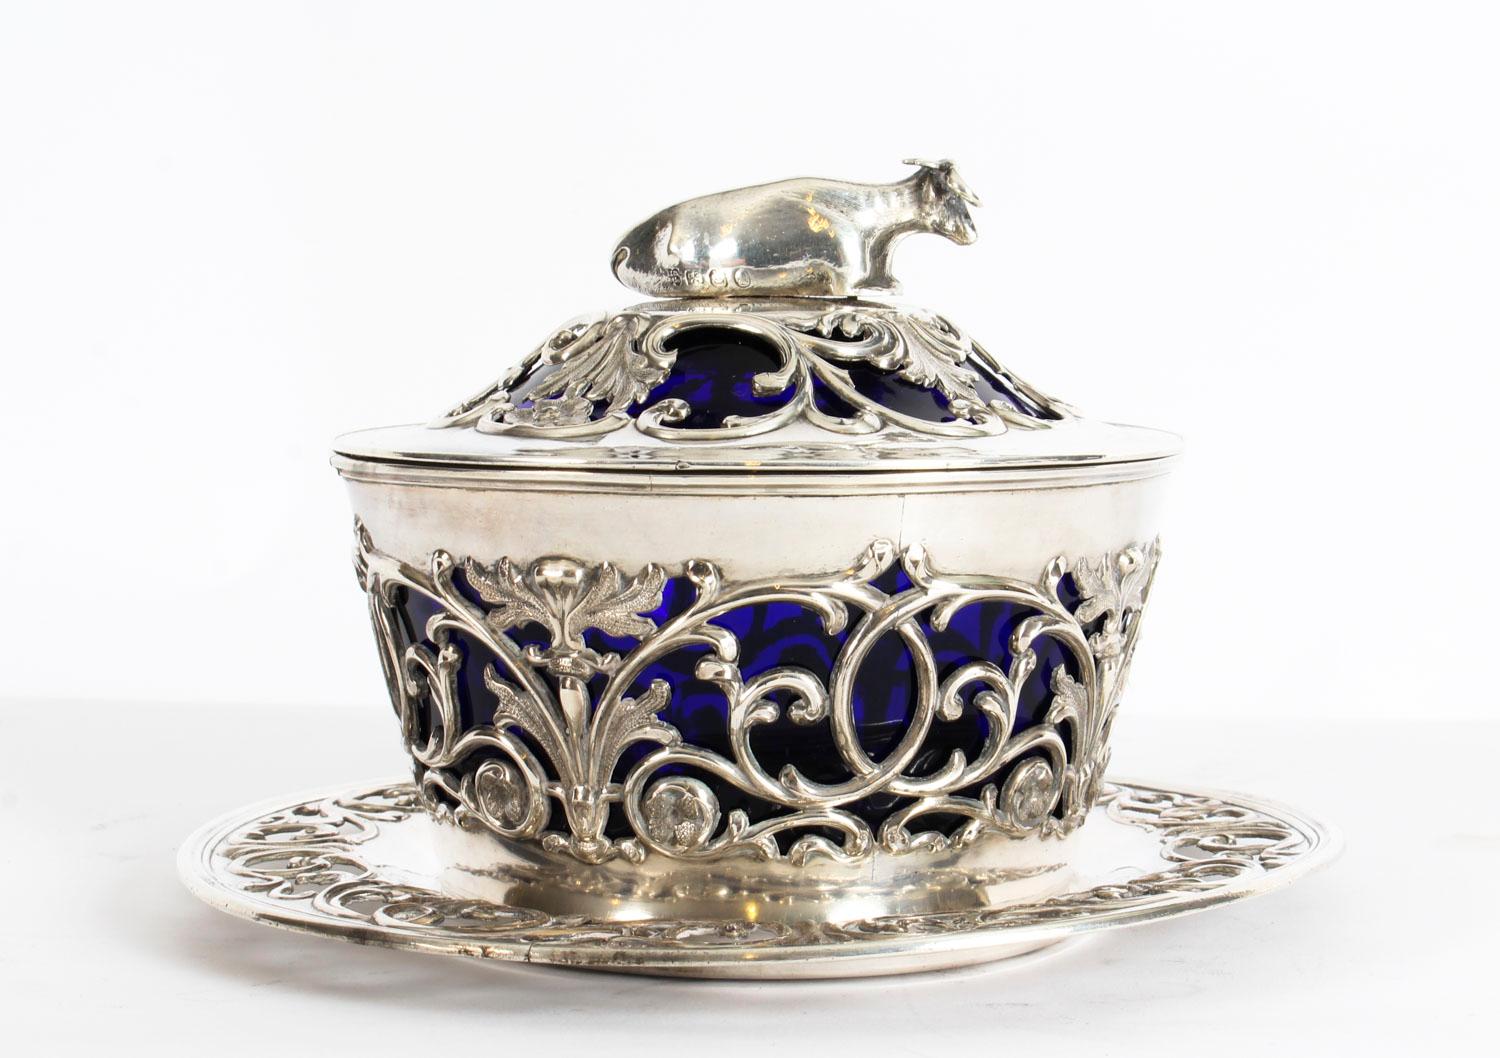 This is a fine antique English Old Sheffield silver plated and Bristol Blue glass lined butter dish, on stand, circa 1820 in date.

The lift up lid with a reclining cow decoration and features pierced decoration with the blue glass liner showing